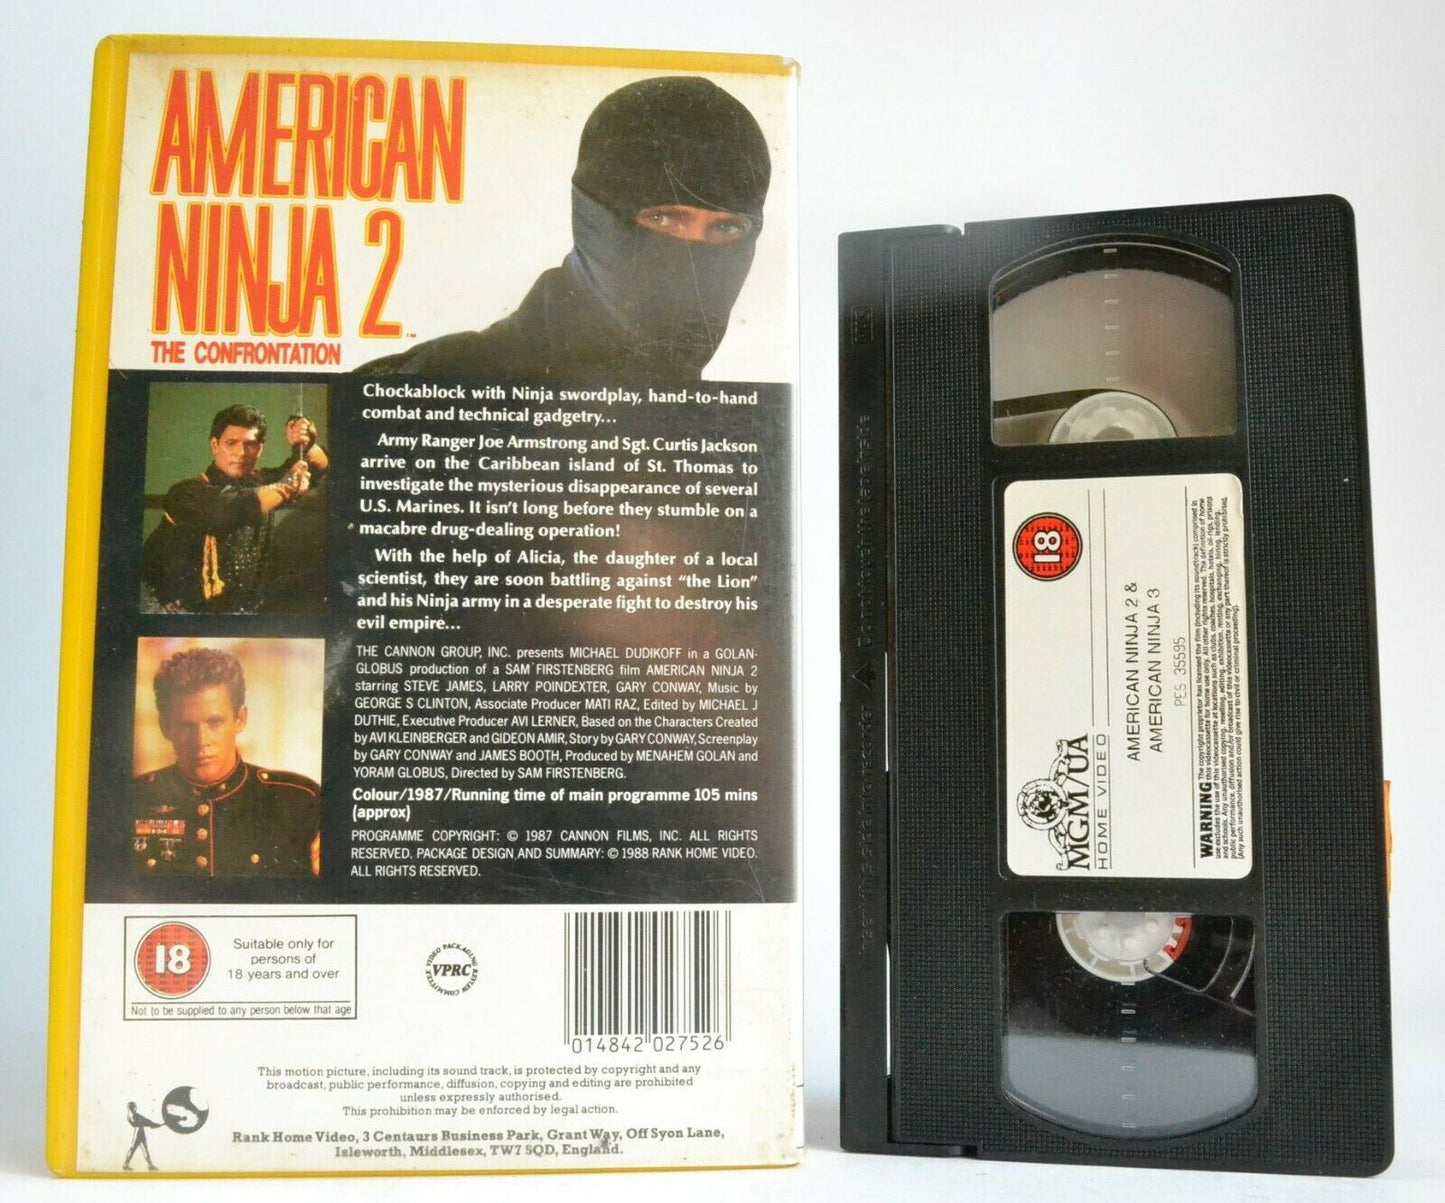 American Ninja 2: The Confrontantion; [Cannon] Big Box - Action - Michael Dudikoff - Pal VHS - Golden Class Movies LTD